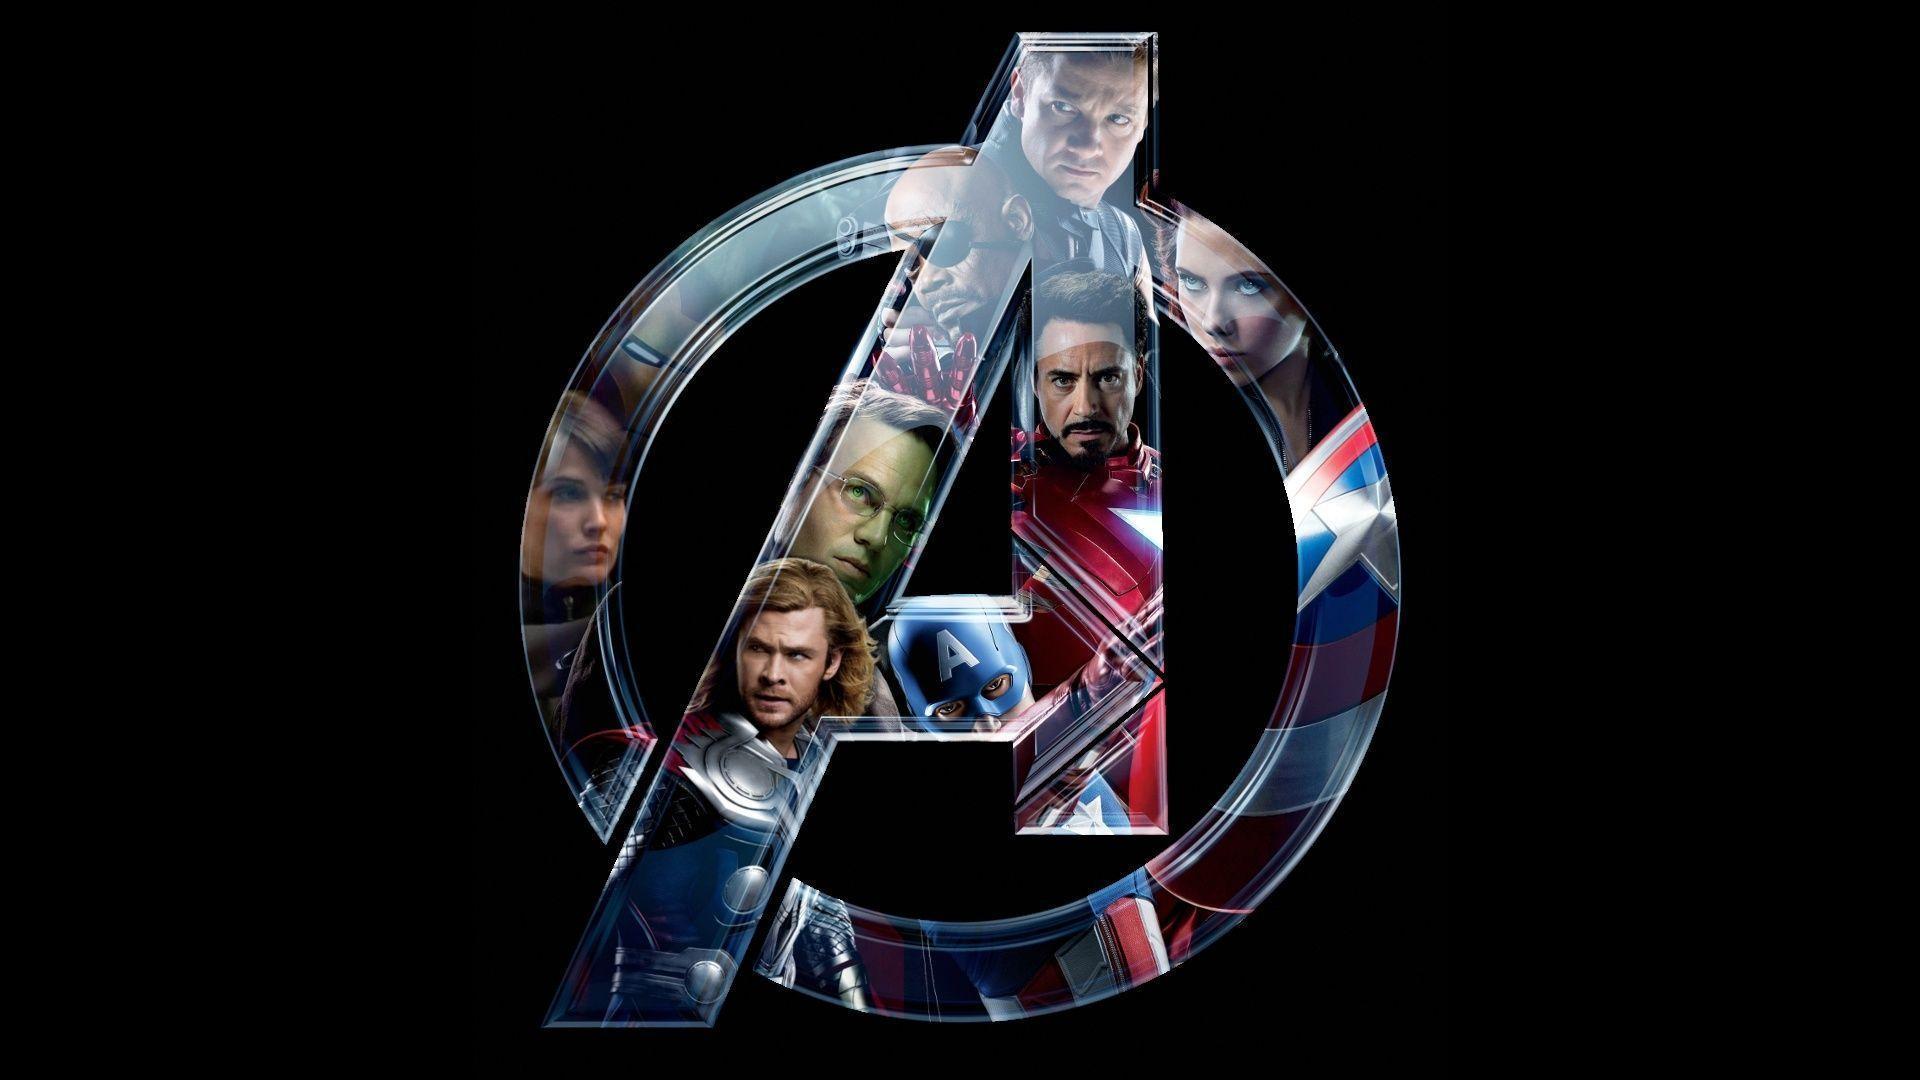 Avengers 2 Wallpaper, Picture, Image 1366x768 and other